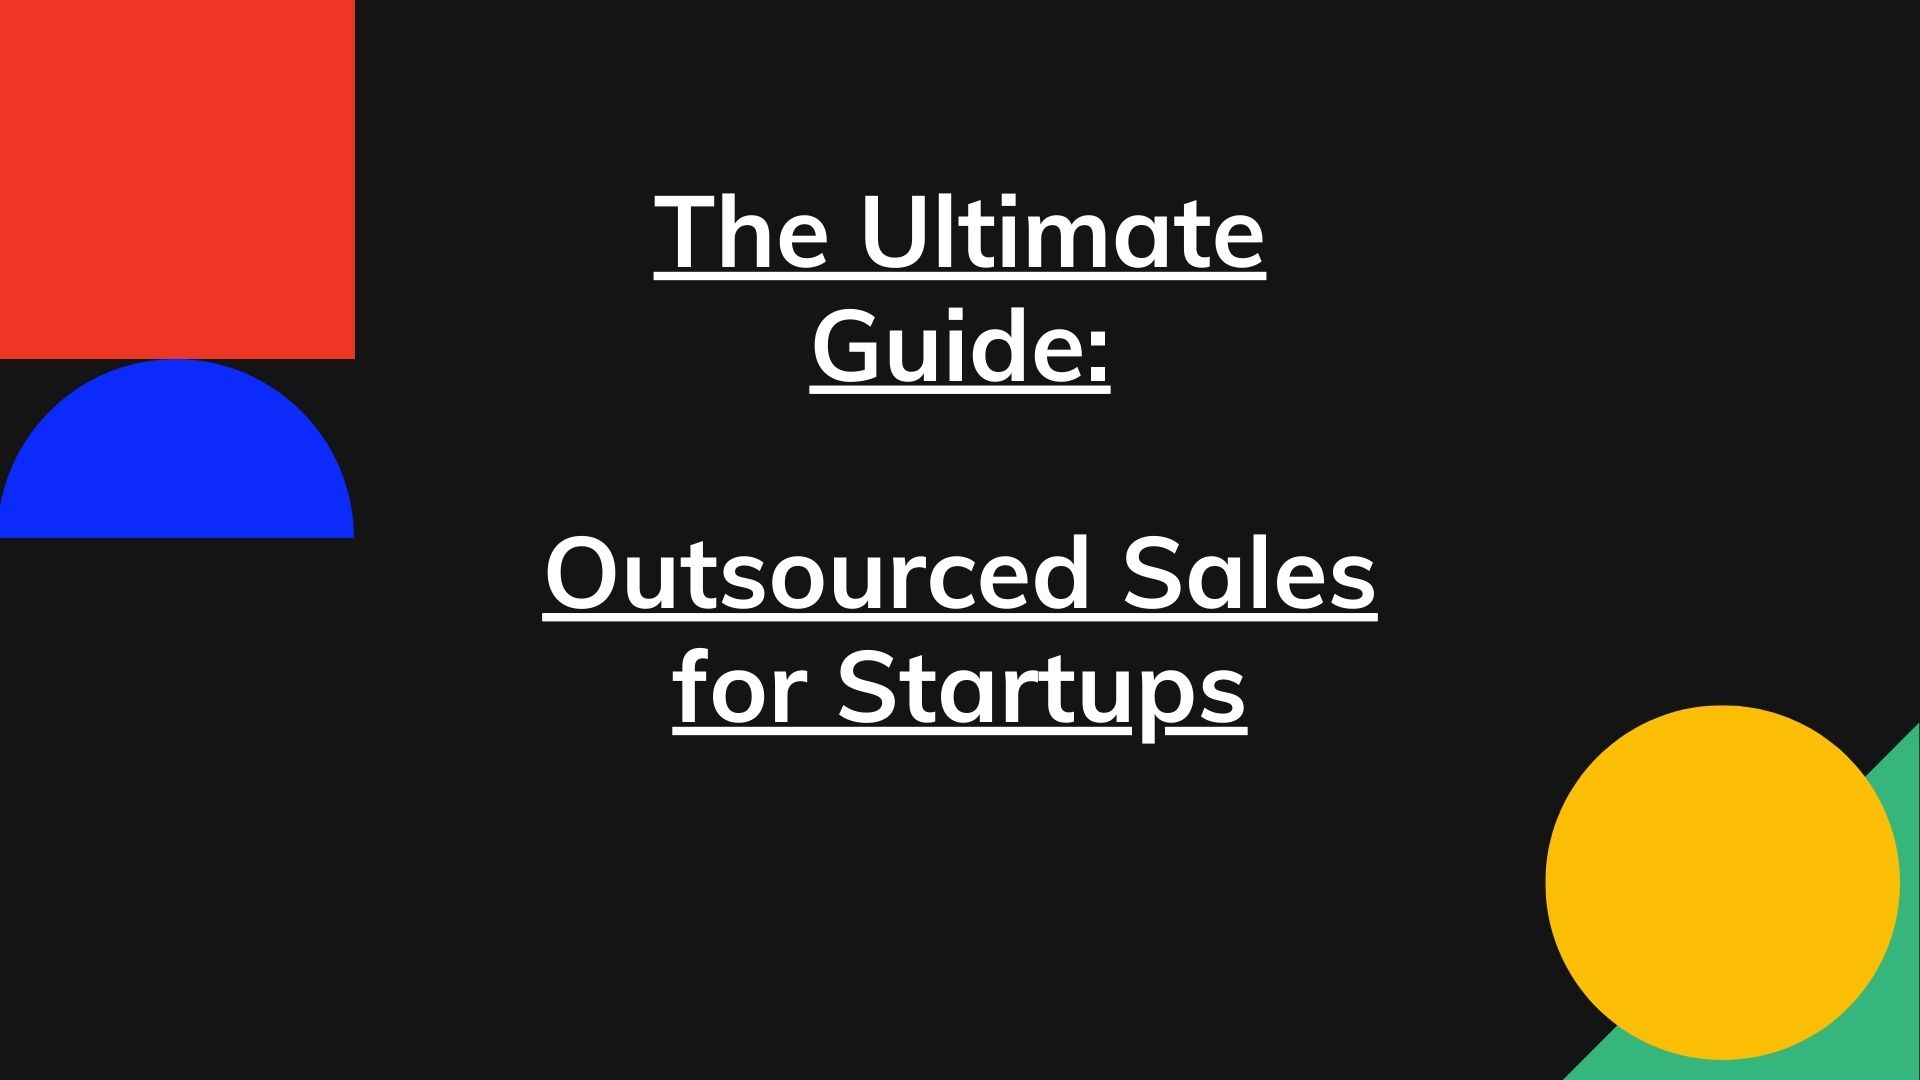 Outsourced sales for startups